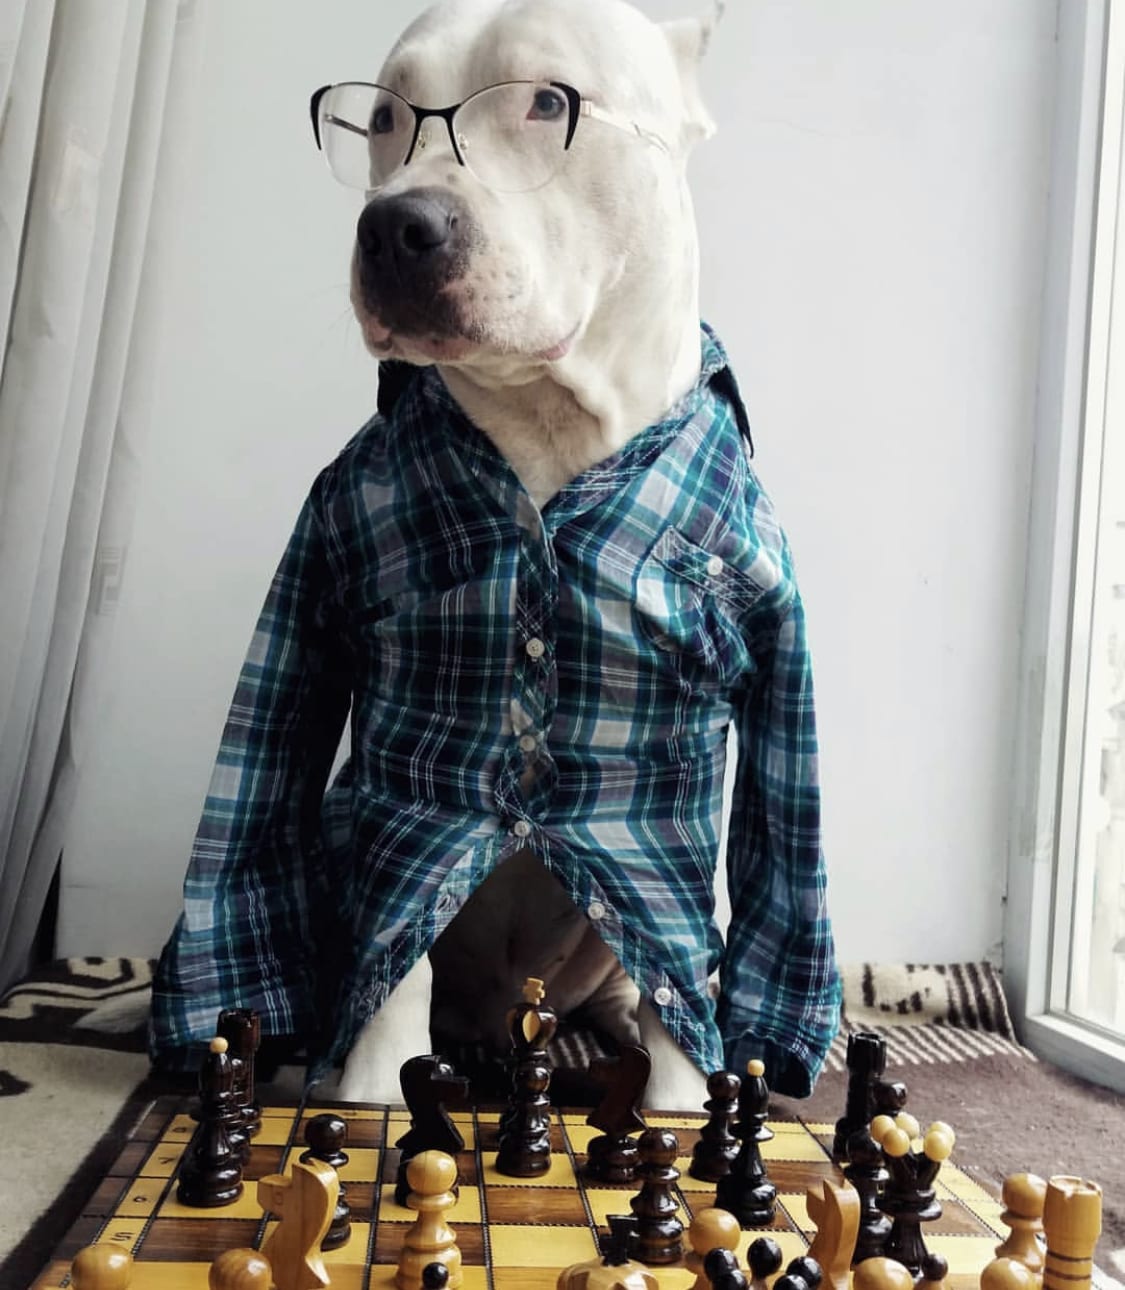 Bull Terrier sitting on across the chess board while wearing a checkered long sleeves